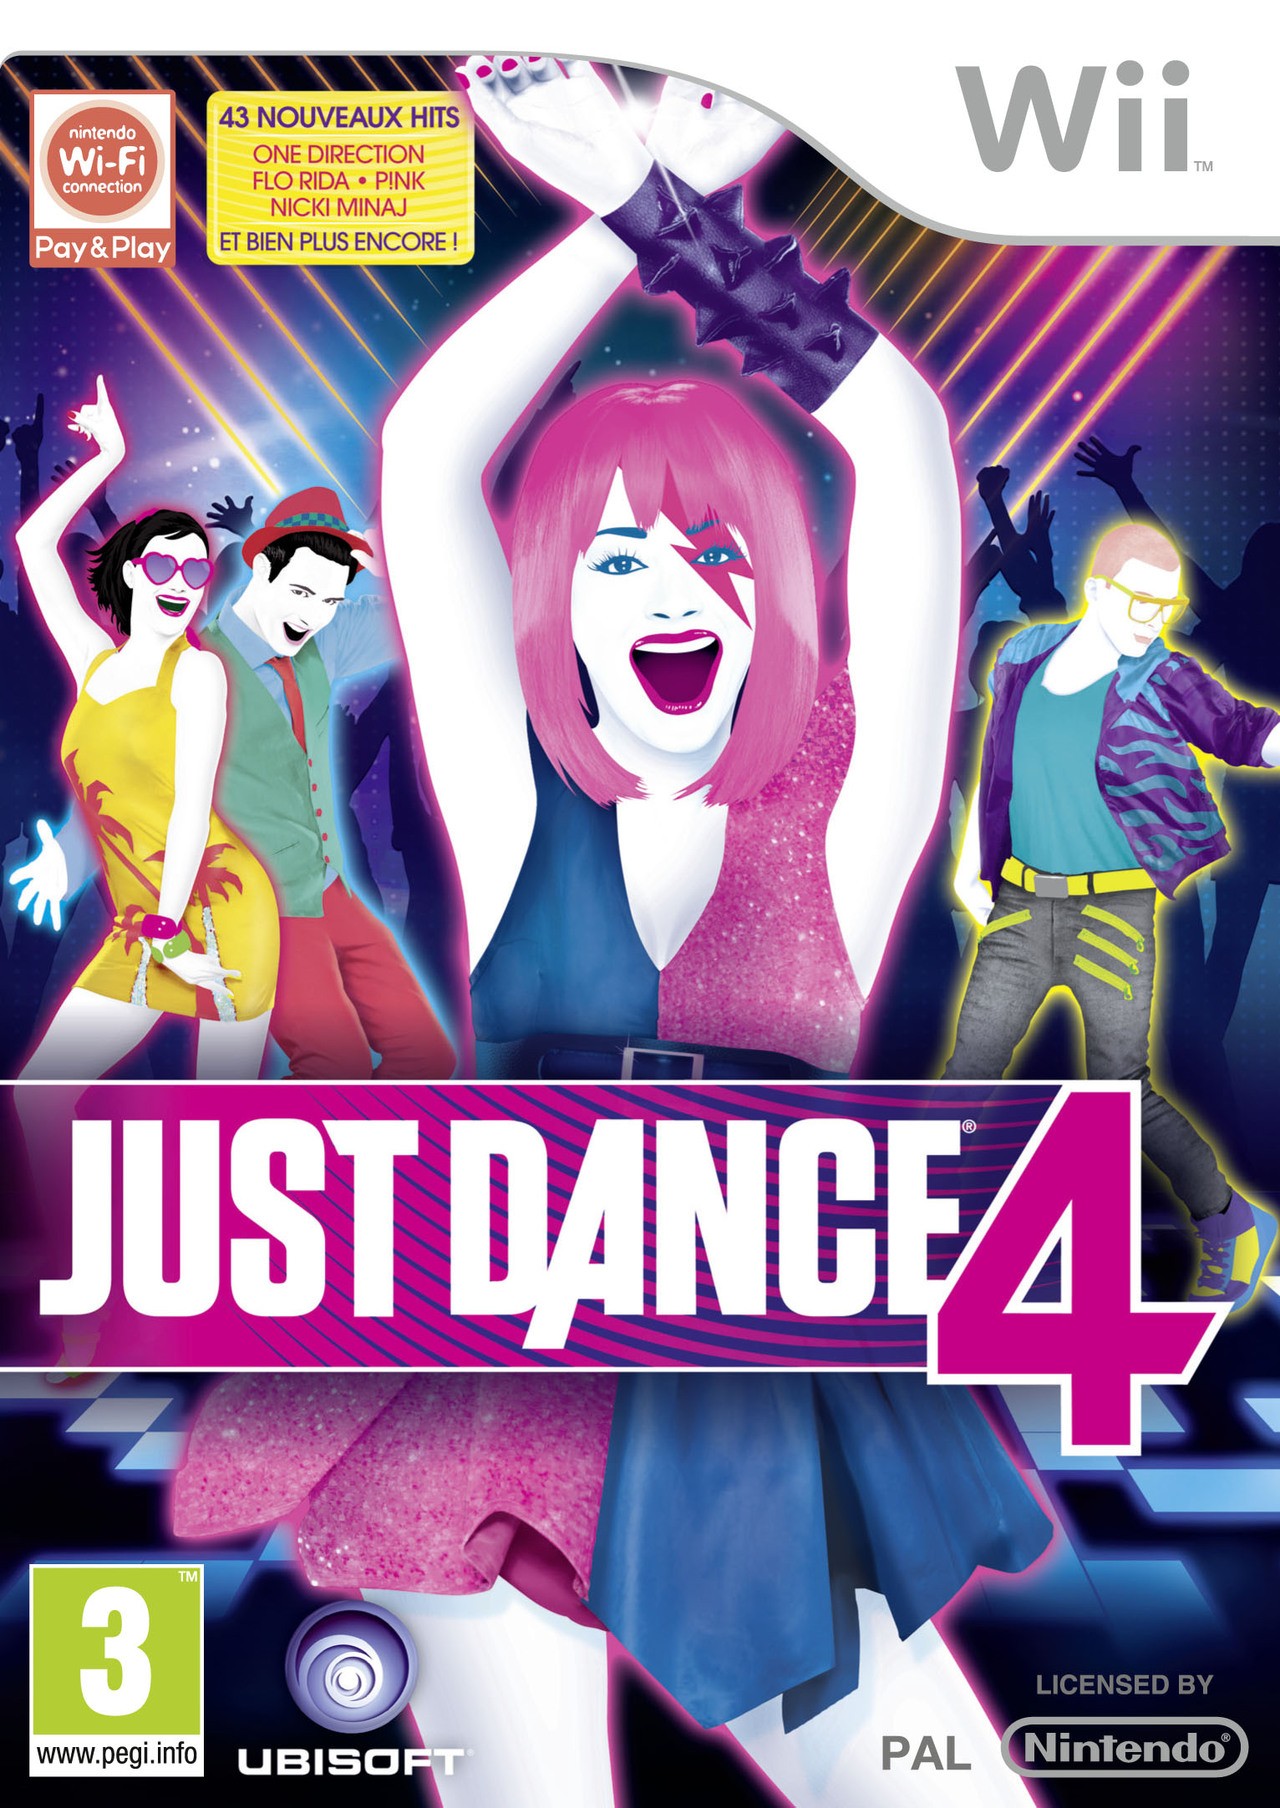 comment gagner wii points just dance 4